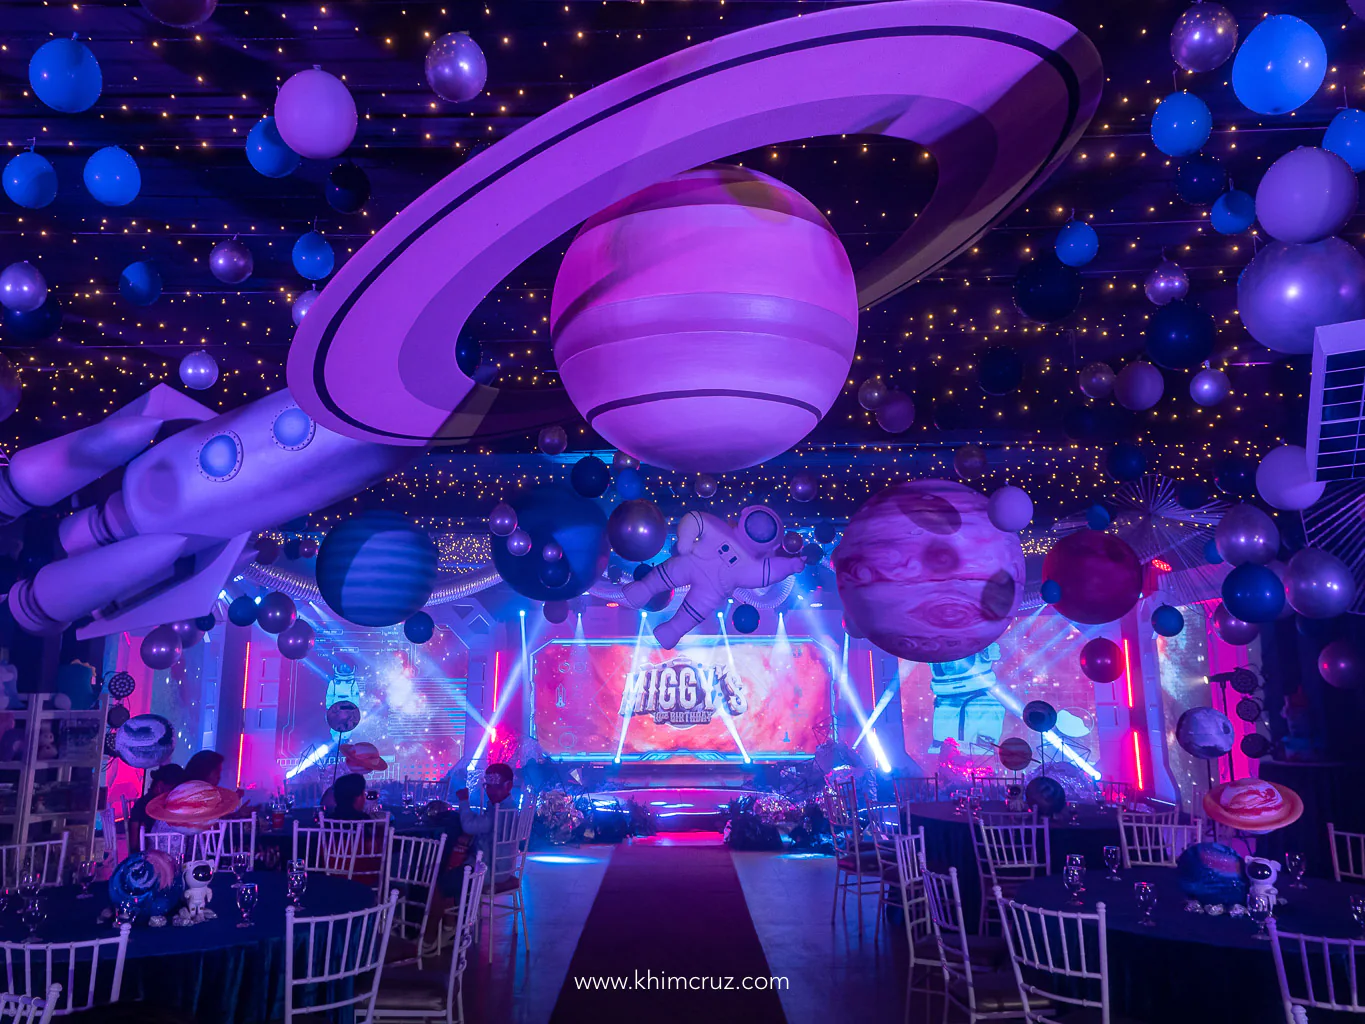 space-themed kid's birthday party with hanging planets and space crafts